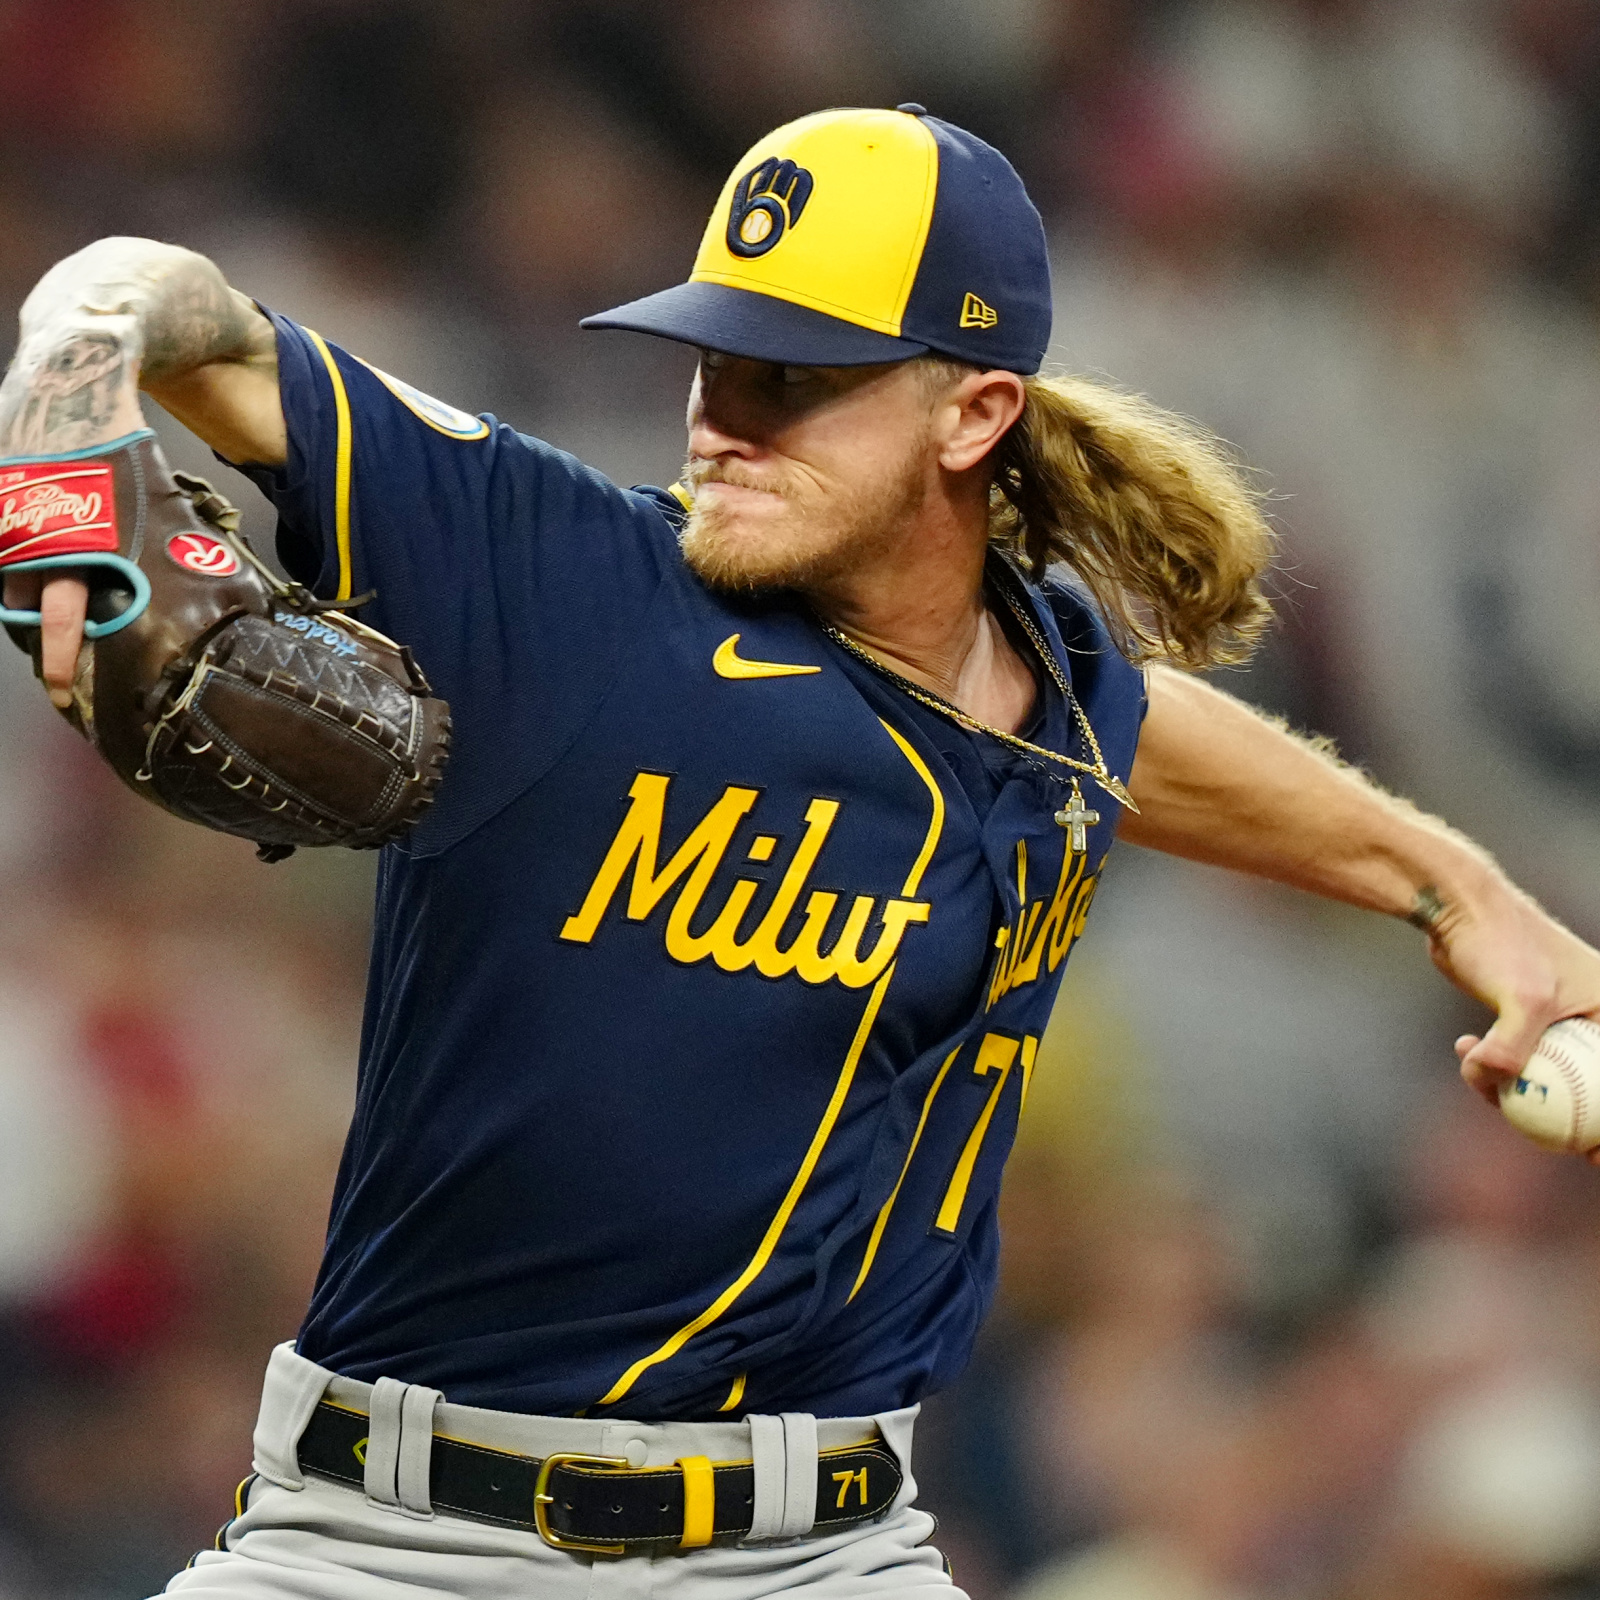 Josh Hader - MLB Relief pitcher - News, Stats, Bio and more - The Athletic